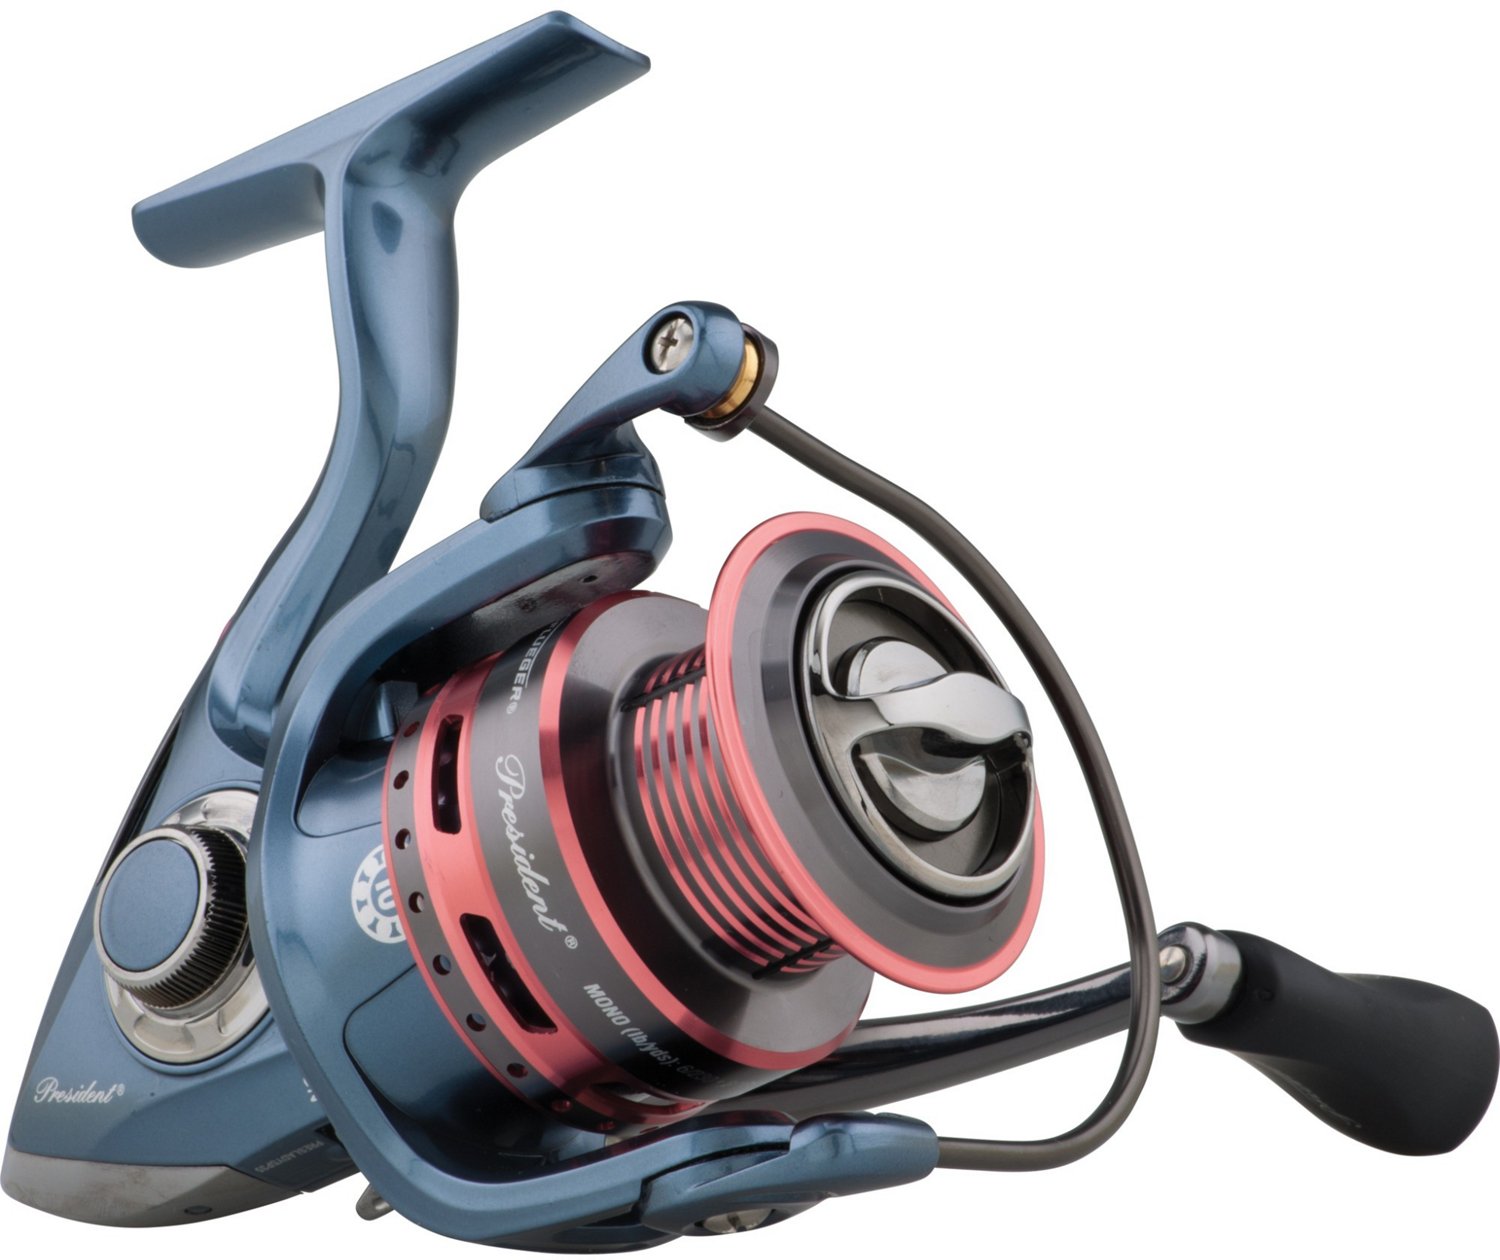 Pflueger Lady President Spinning Reel | Free Shipping at Academy